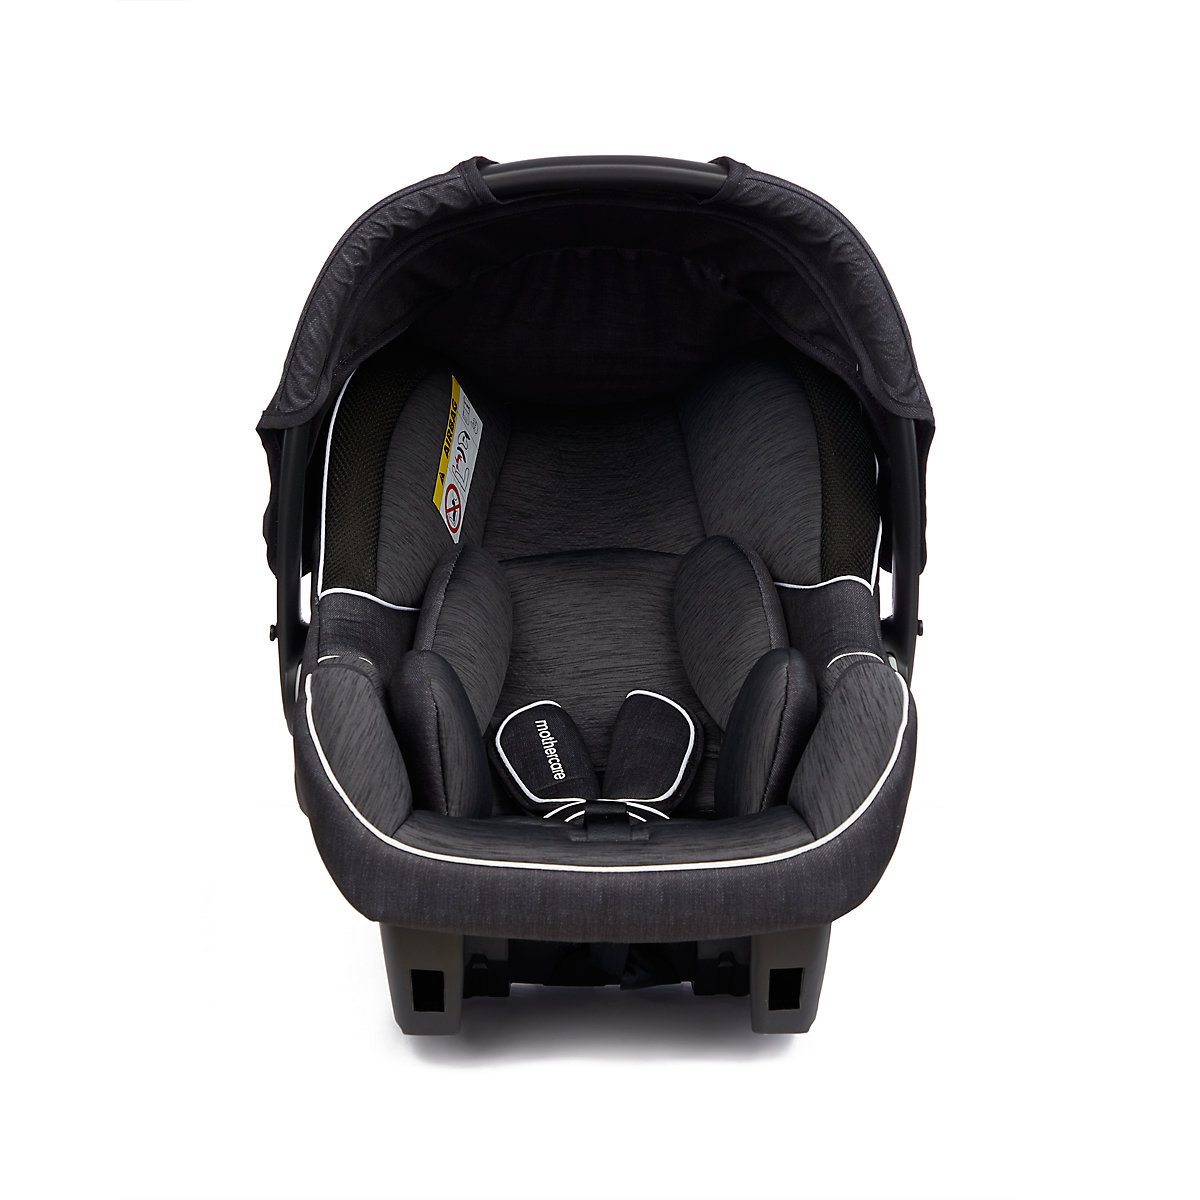 Mothercare Mothercare Ziba Baby Car Seat Black And Grey 